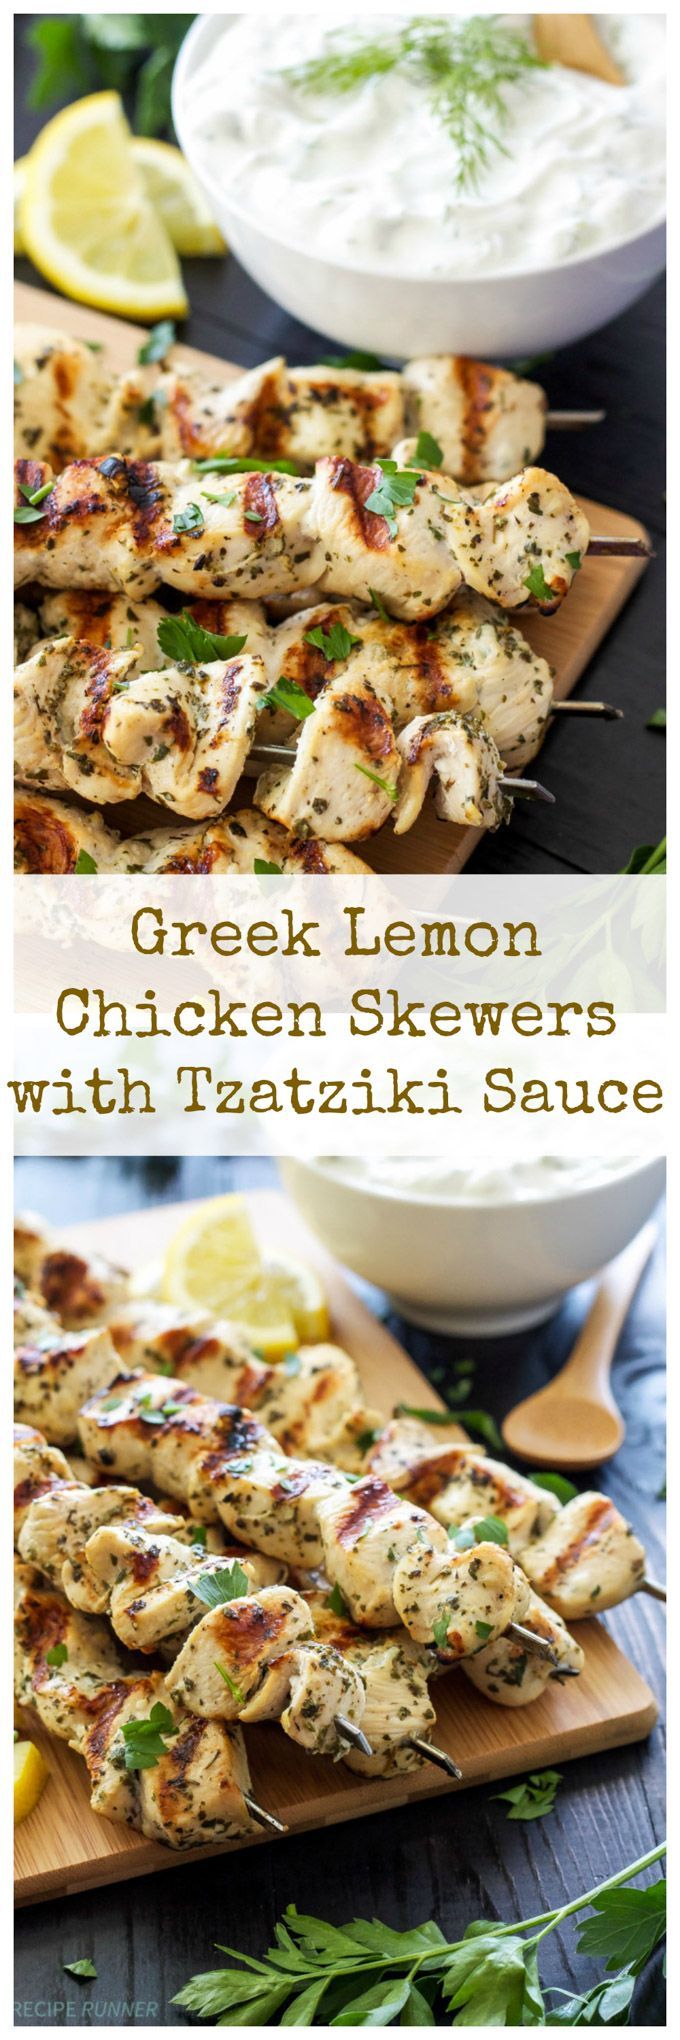 Greek Lemon Chicken Skewers with Tzatziki Sauce | Delicious and healthy Greek chic